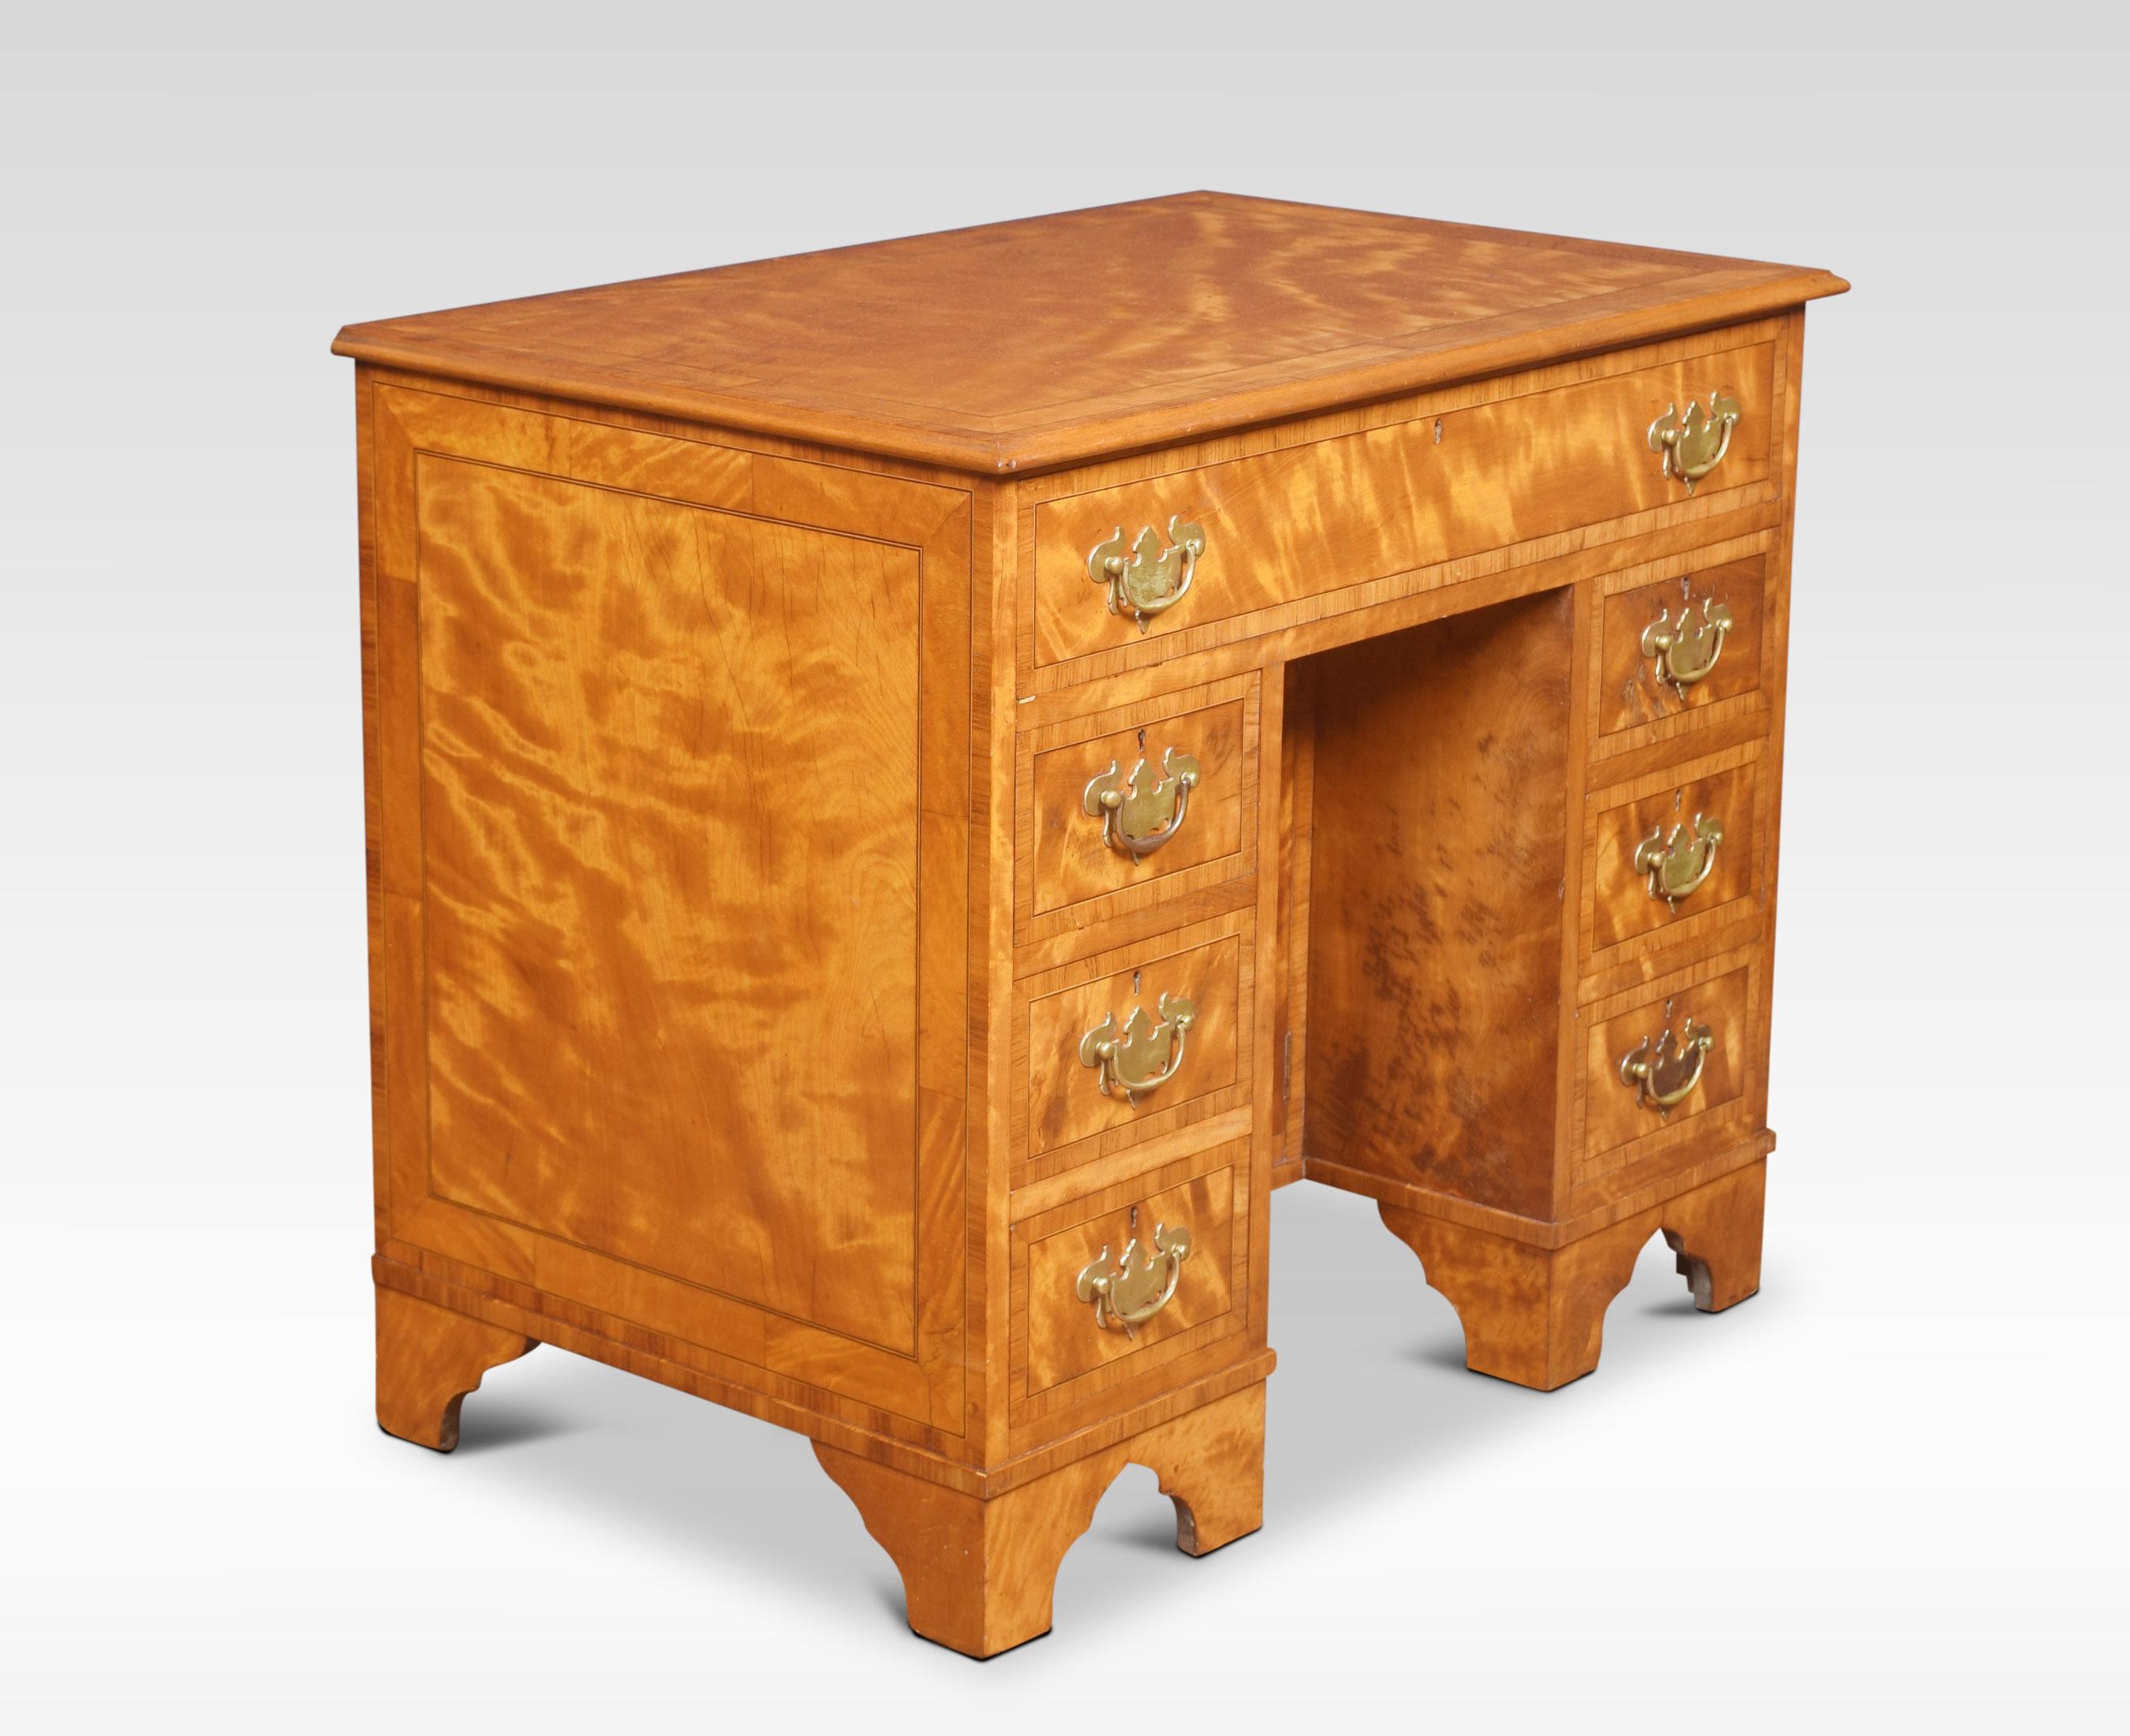 George III Style Satinwood Kneehole Desk In Good Condition For Sale In Cheshire, GB